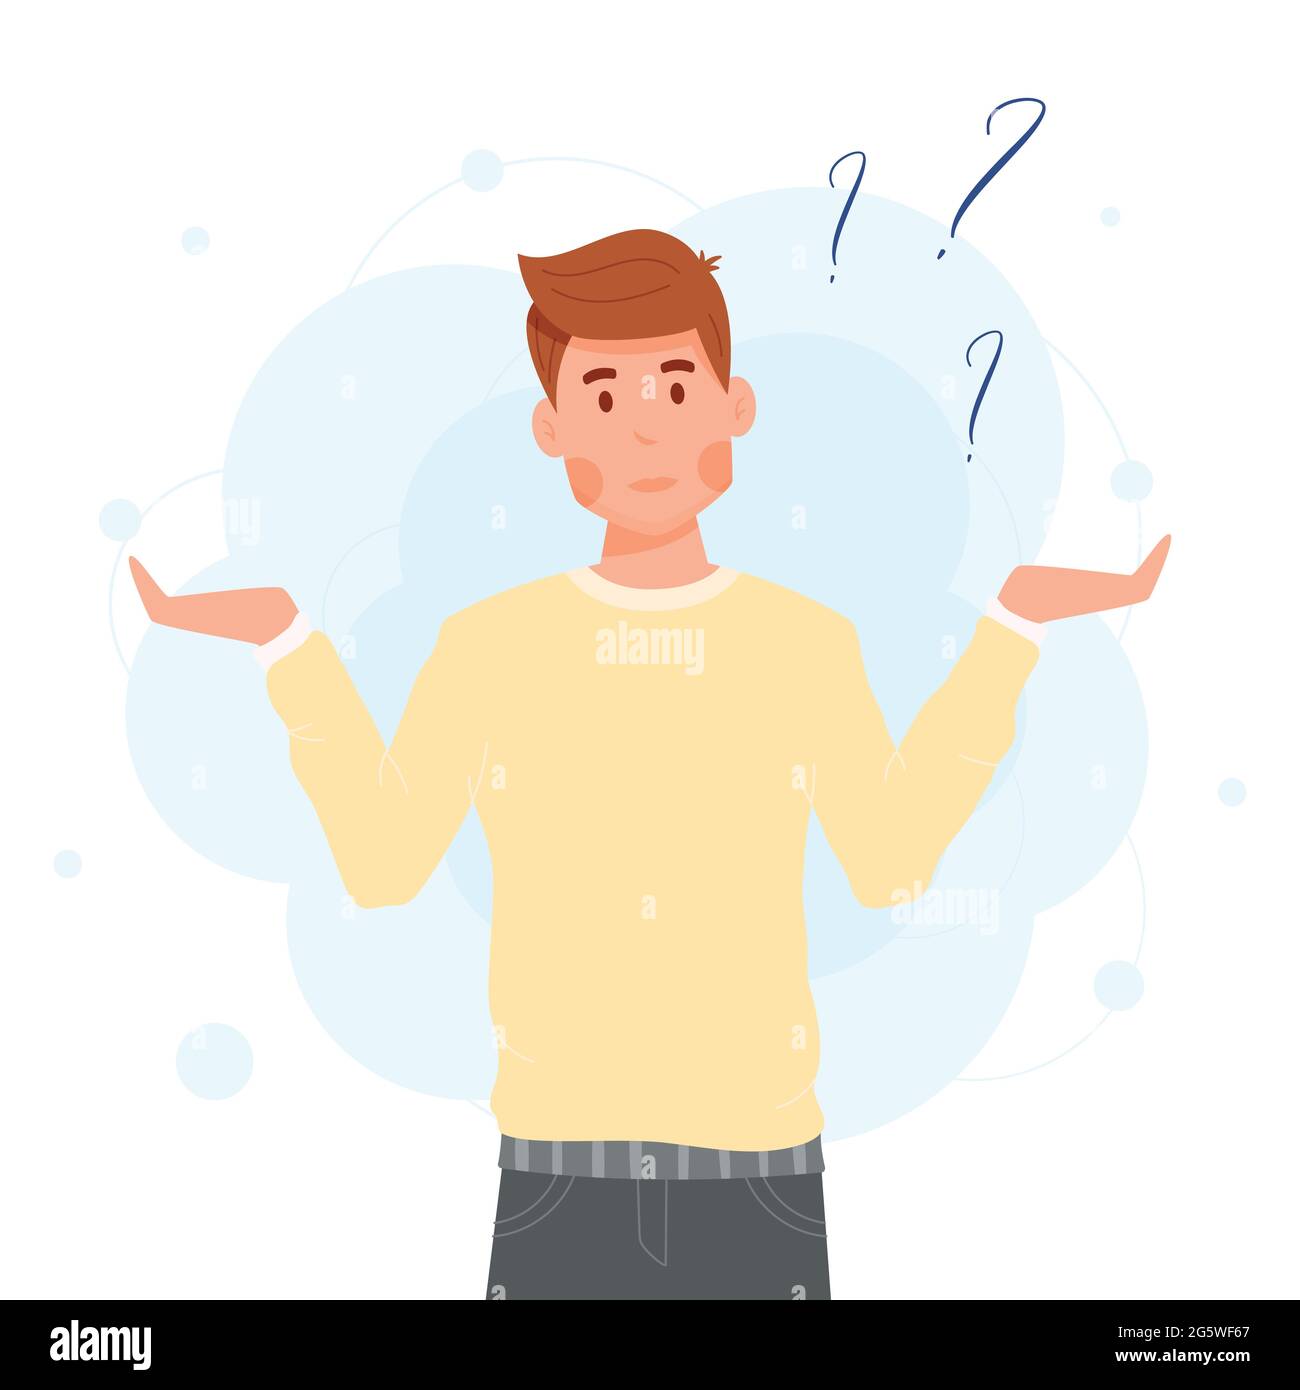 Confused Man Concept Illustration With Wide Spread Heands And Question Marks Flat Vector 4203